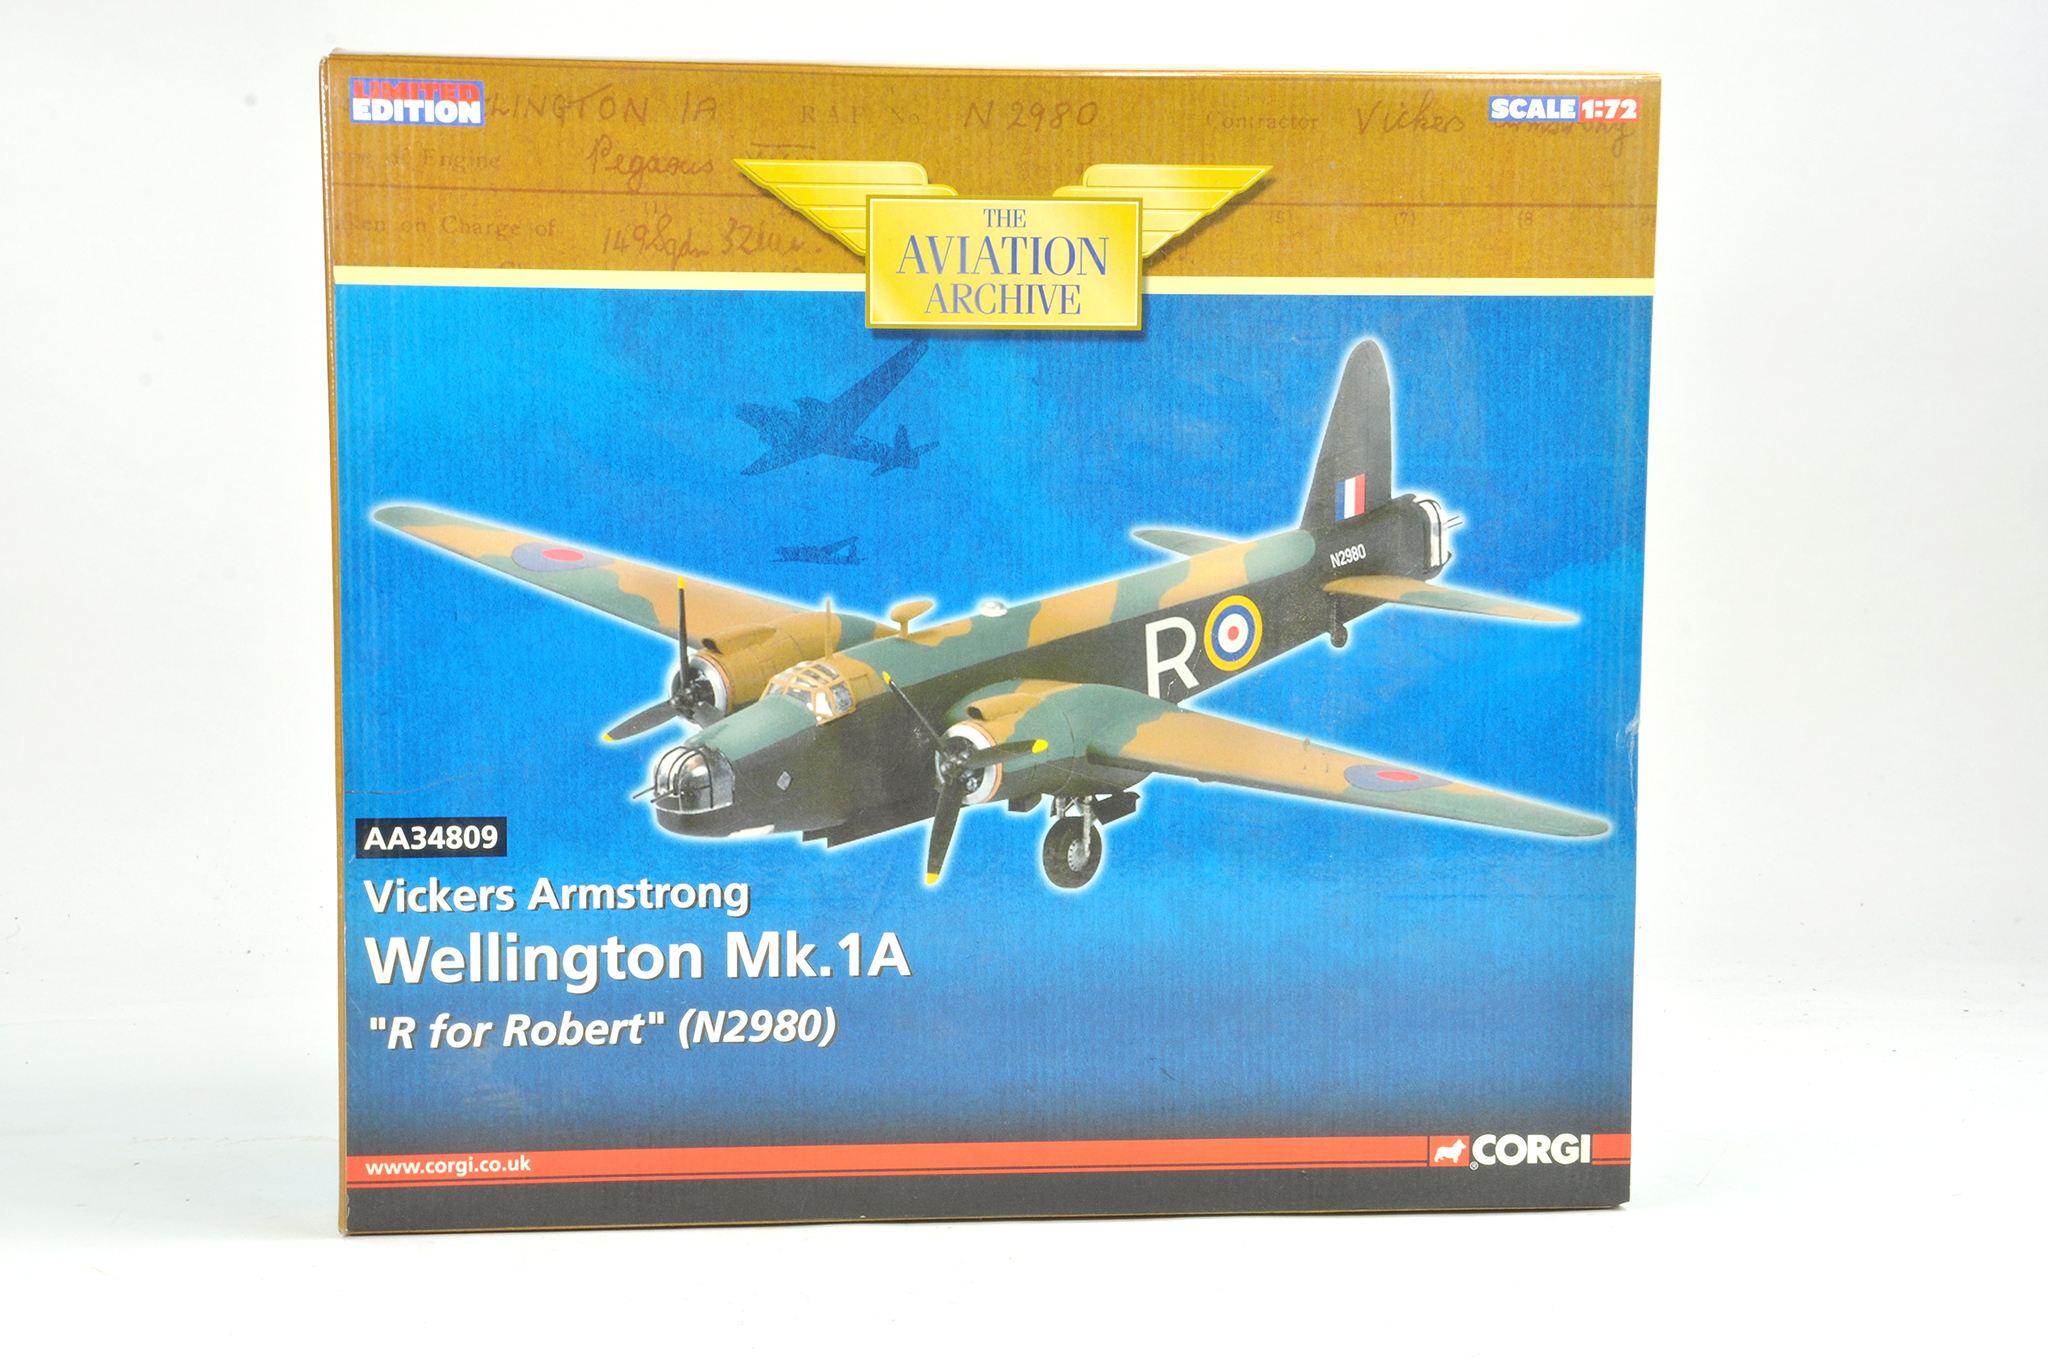 Corgi Diecast Aircraft Aviation Archive issue comprising No. AA34809 Vickers Wellington. Appears